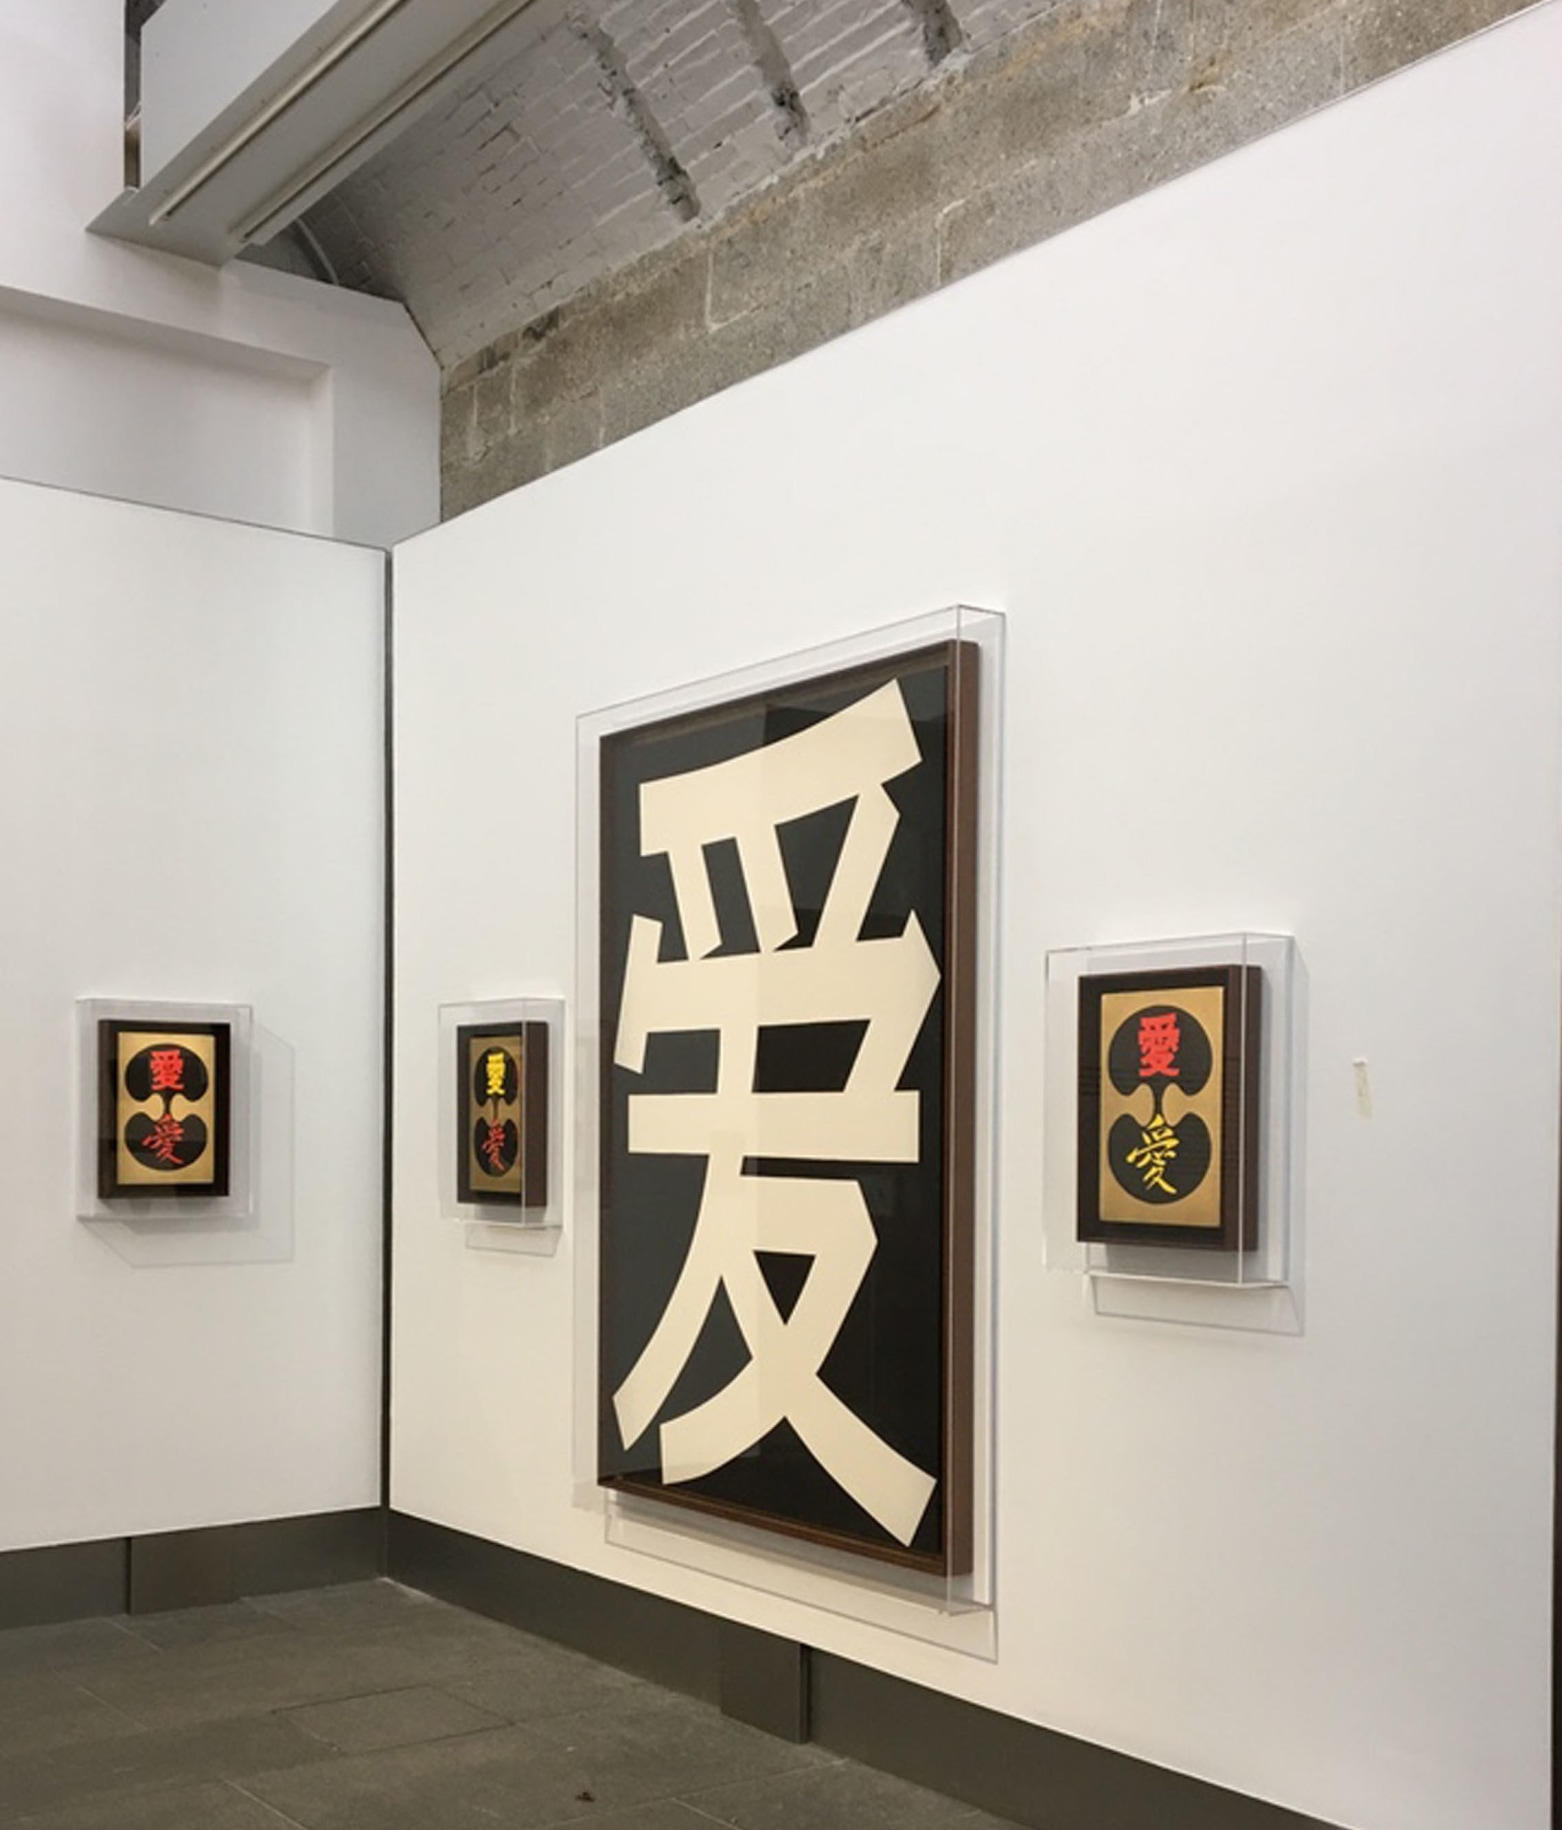 Installation view of&nbsp;Love Long: Robert Indiana and Asia, Asia Society, Hong Kong, February 7&ndash;July 15, 2018. Left to right,&nbsp;The Ginkgo &Agrave;i (2006), The Ginkgo &Agrave;i (2006), &Agrave;i (2002), and&nbsp;The Ginkgo &Agrave;i (2006)